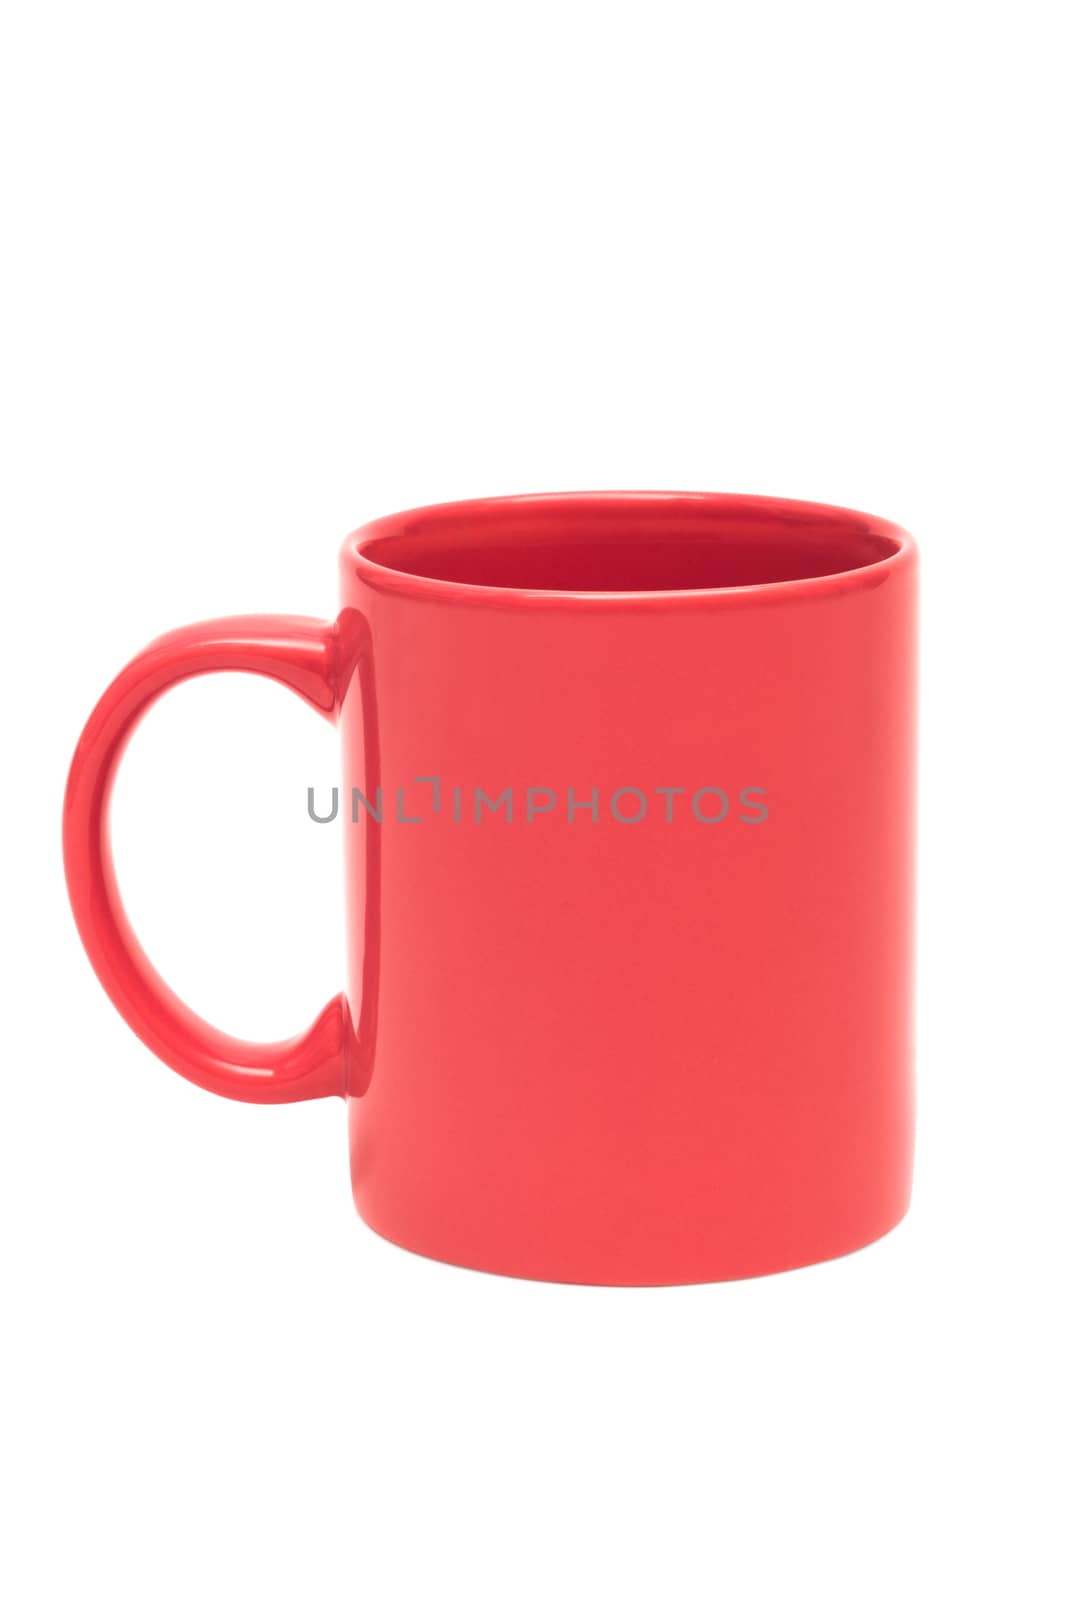 new red mug by terex